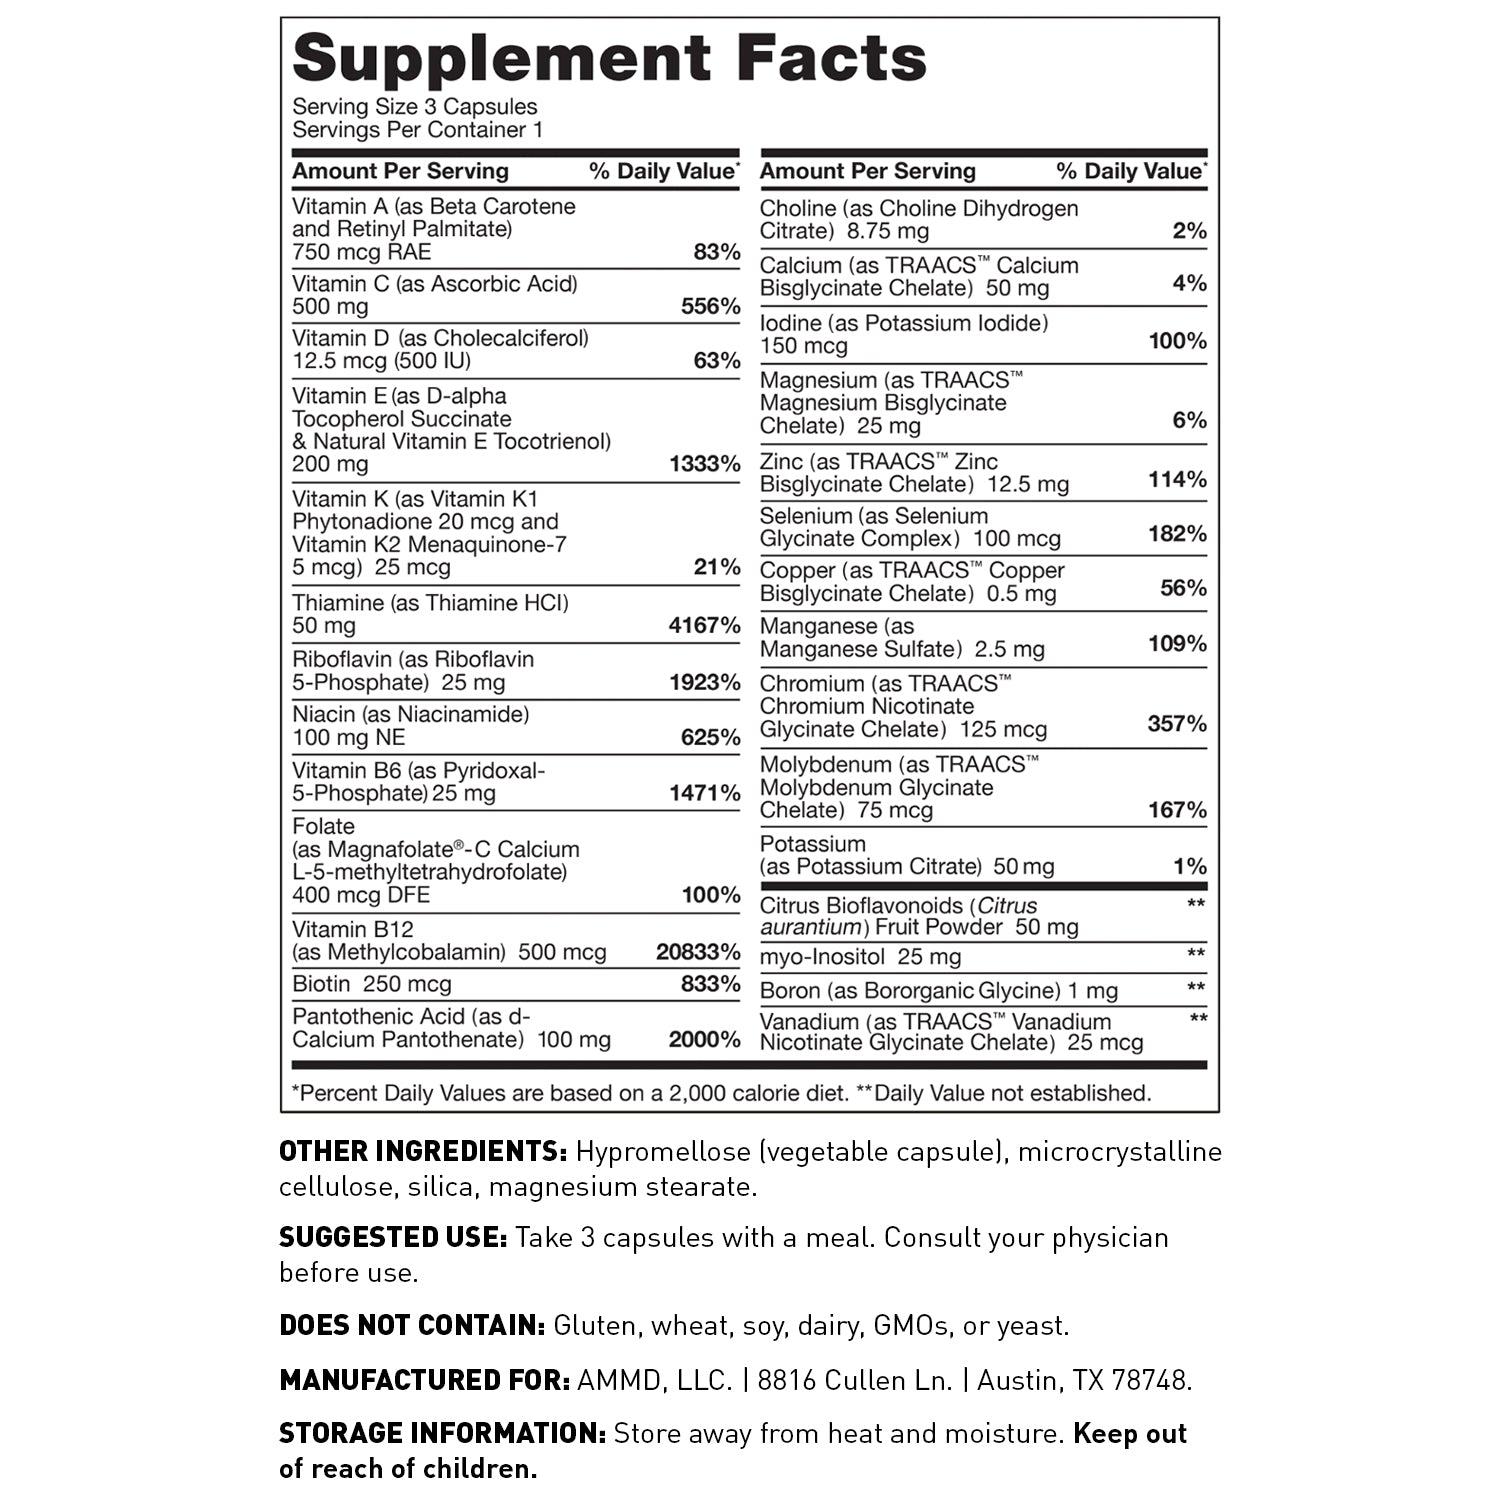 Multivitamin 7 Day Pack - Supplement Facts and ingredients - Amy Myers MD